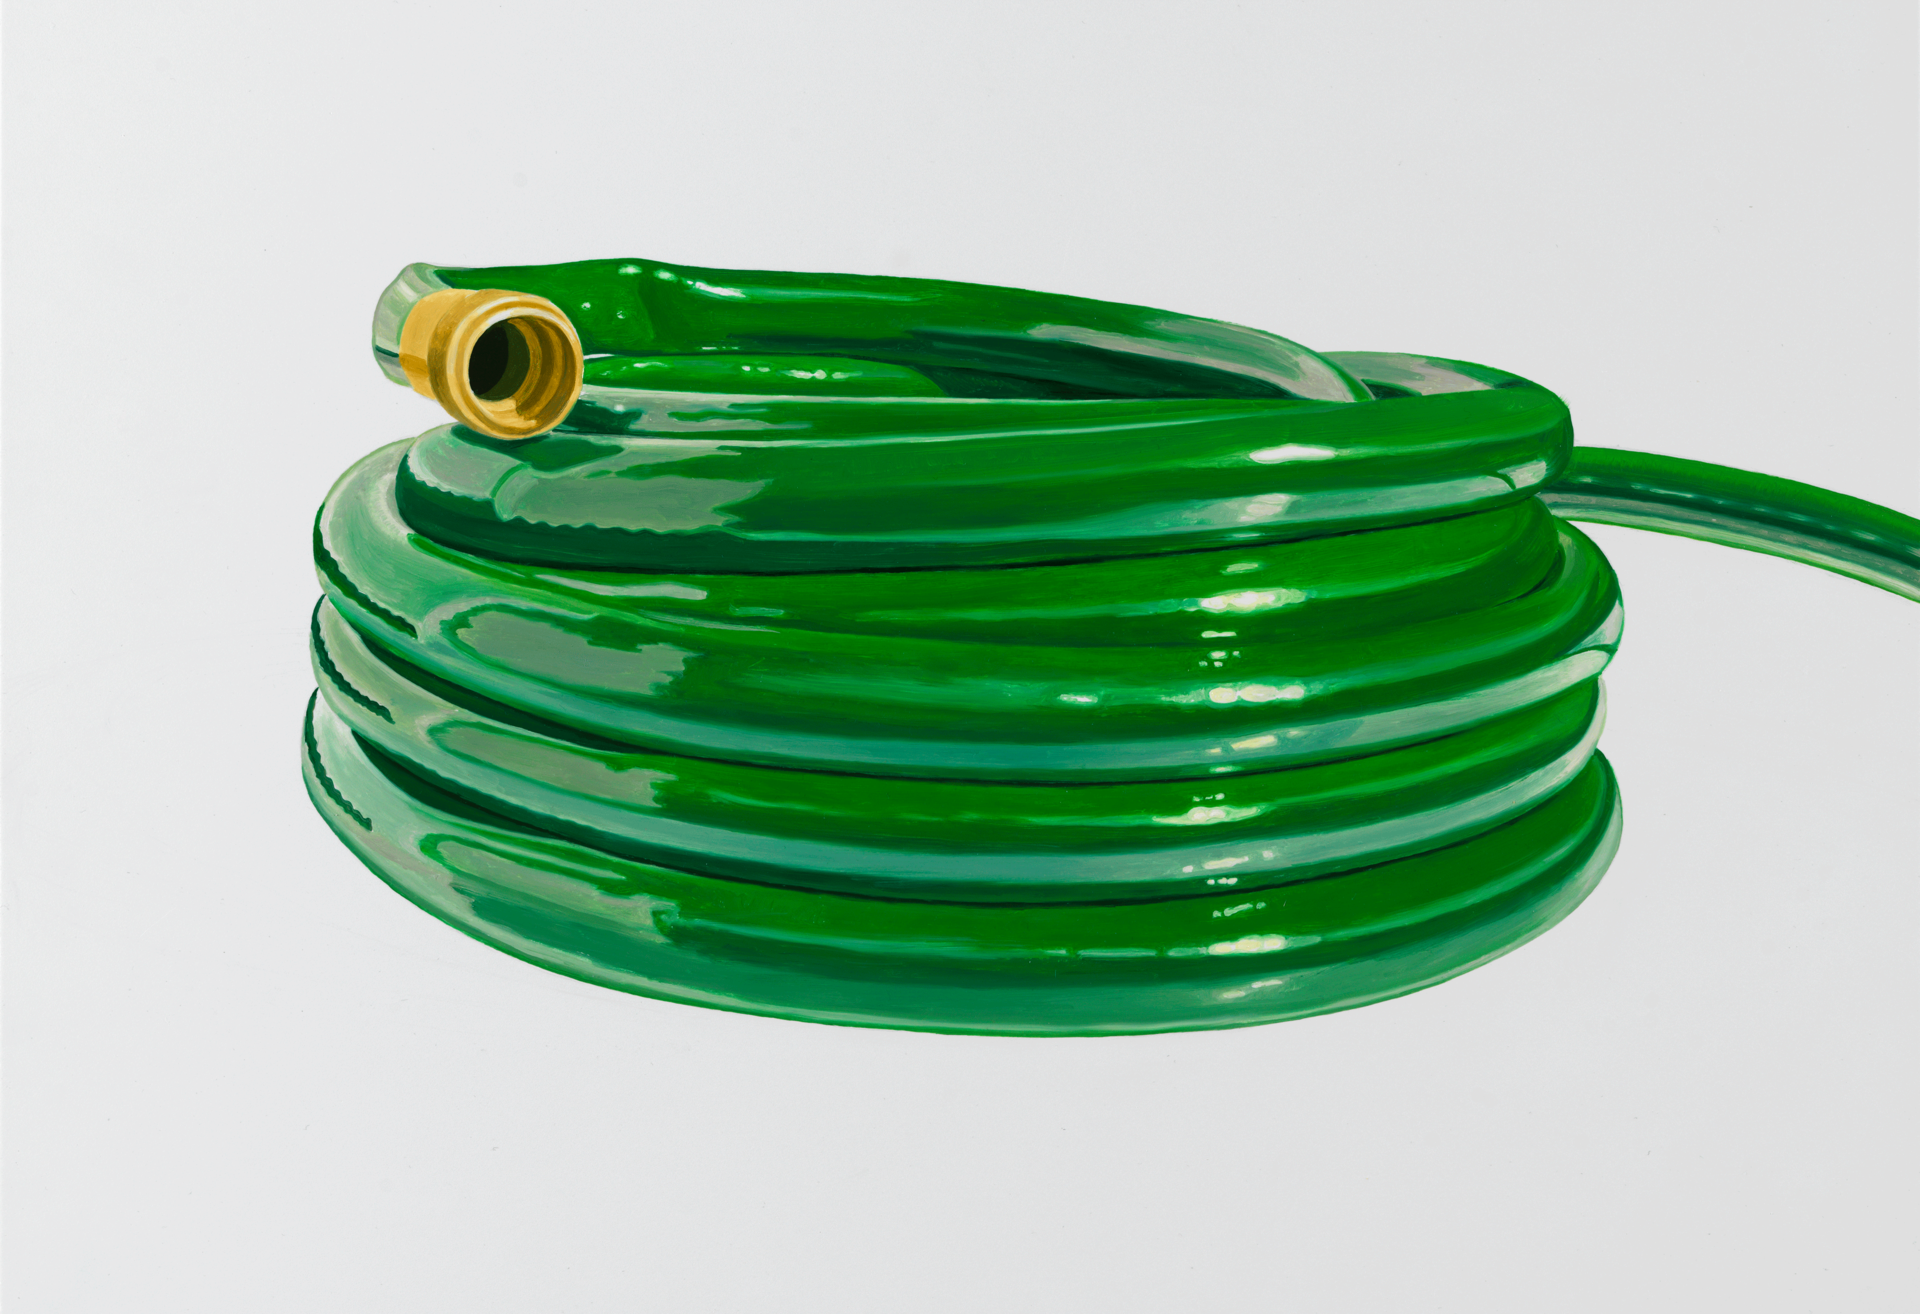 Oil painting of a coiled green garden hose  on a white background